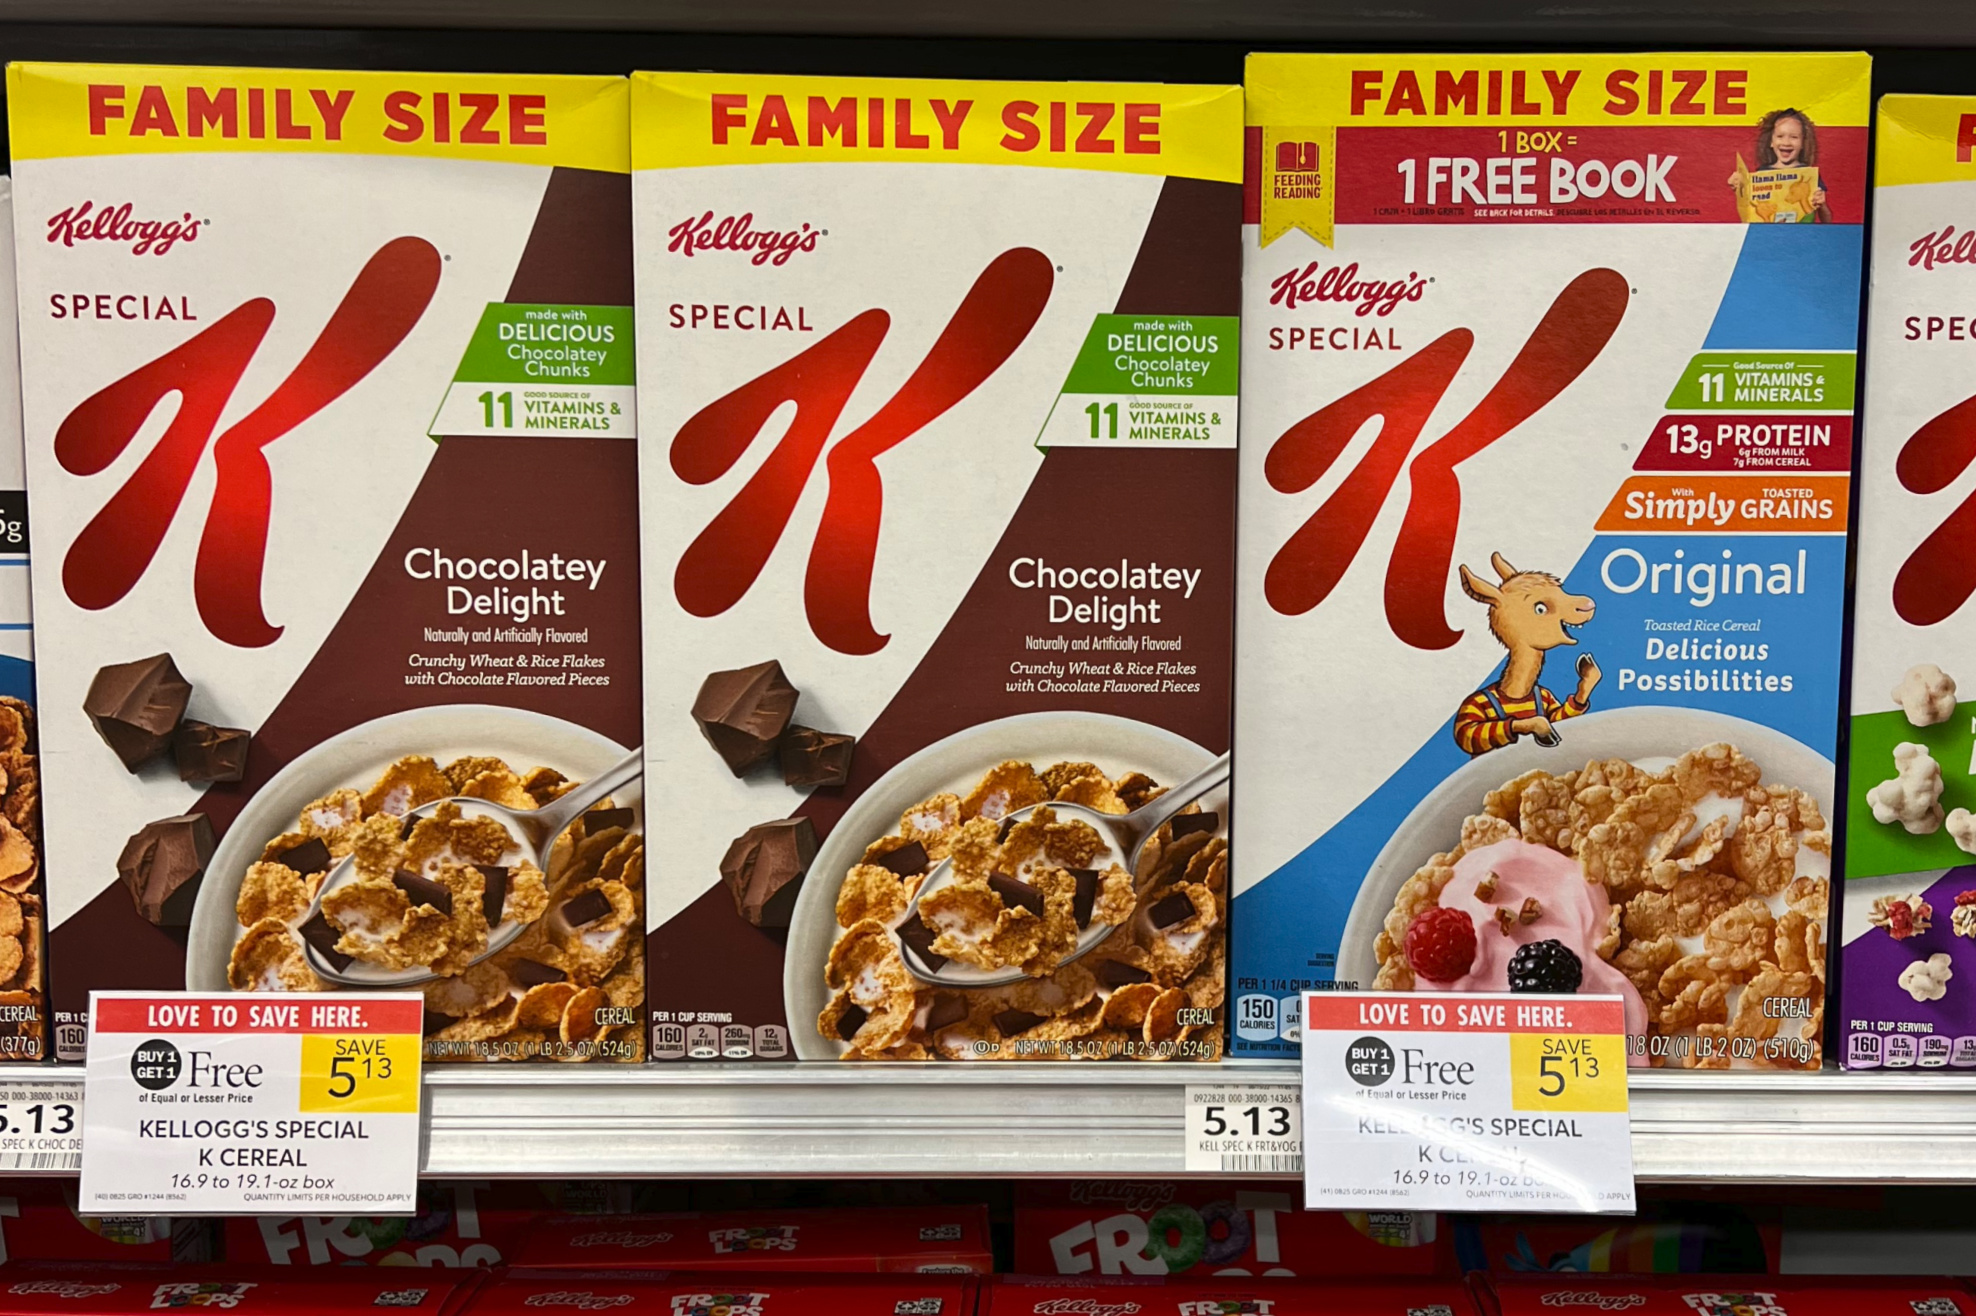 get-boxes-of-kellogg-s-special-k-cereal-for-as-low-as-1-57-at-publix